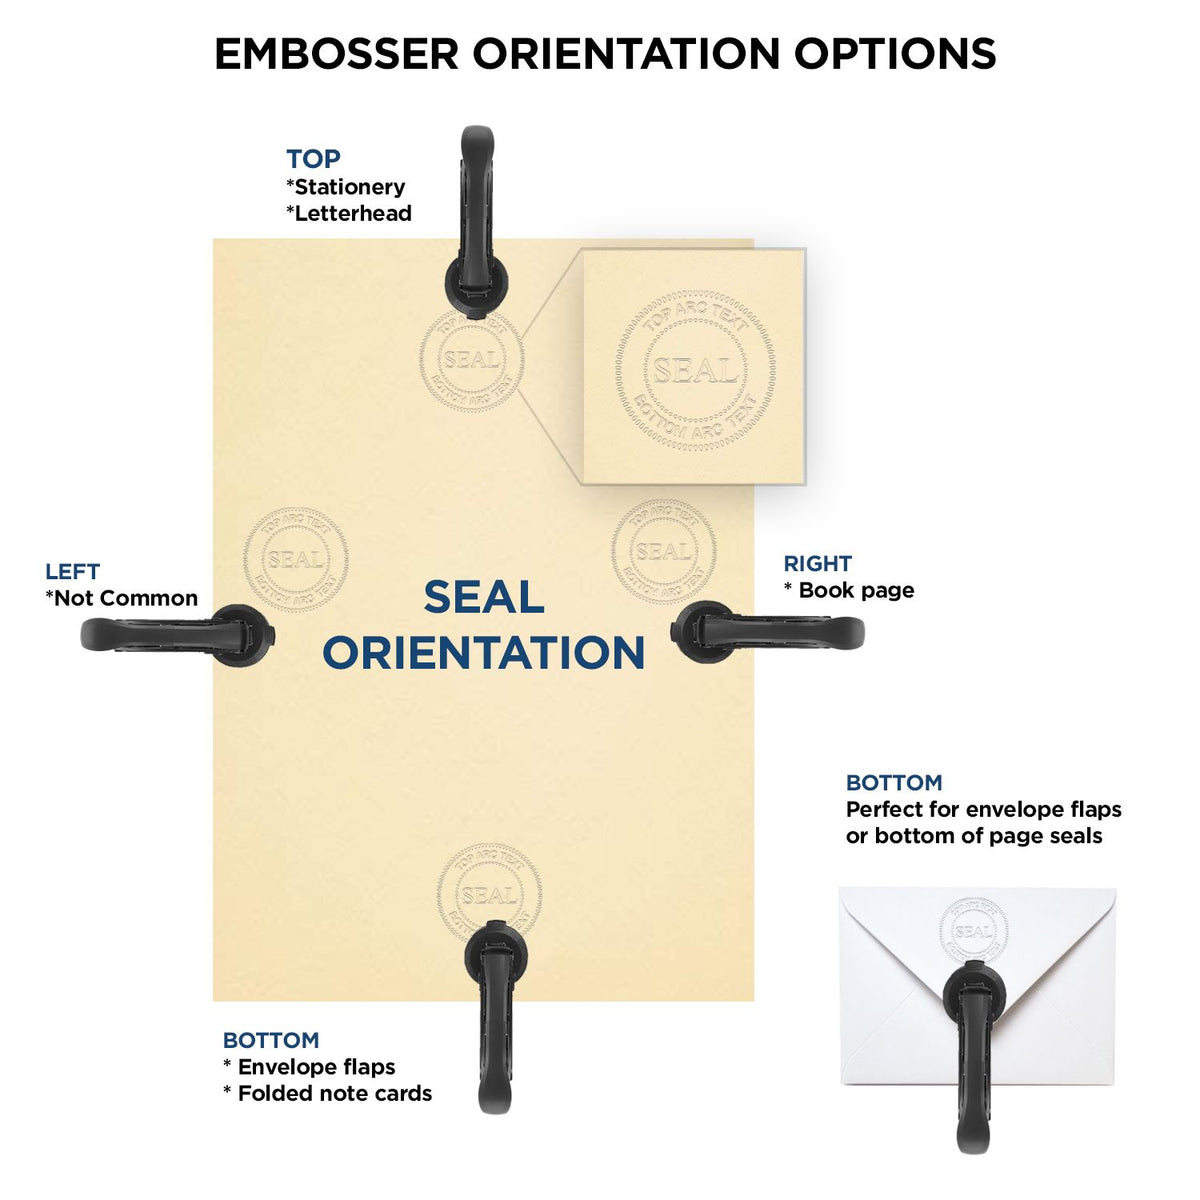 An infographic for the Handheld Connecticut Land Surveyor Seal showing embosser orientation, this is showing examples of a top, bottom, right and left insert.